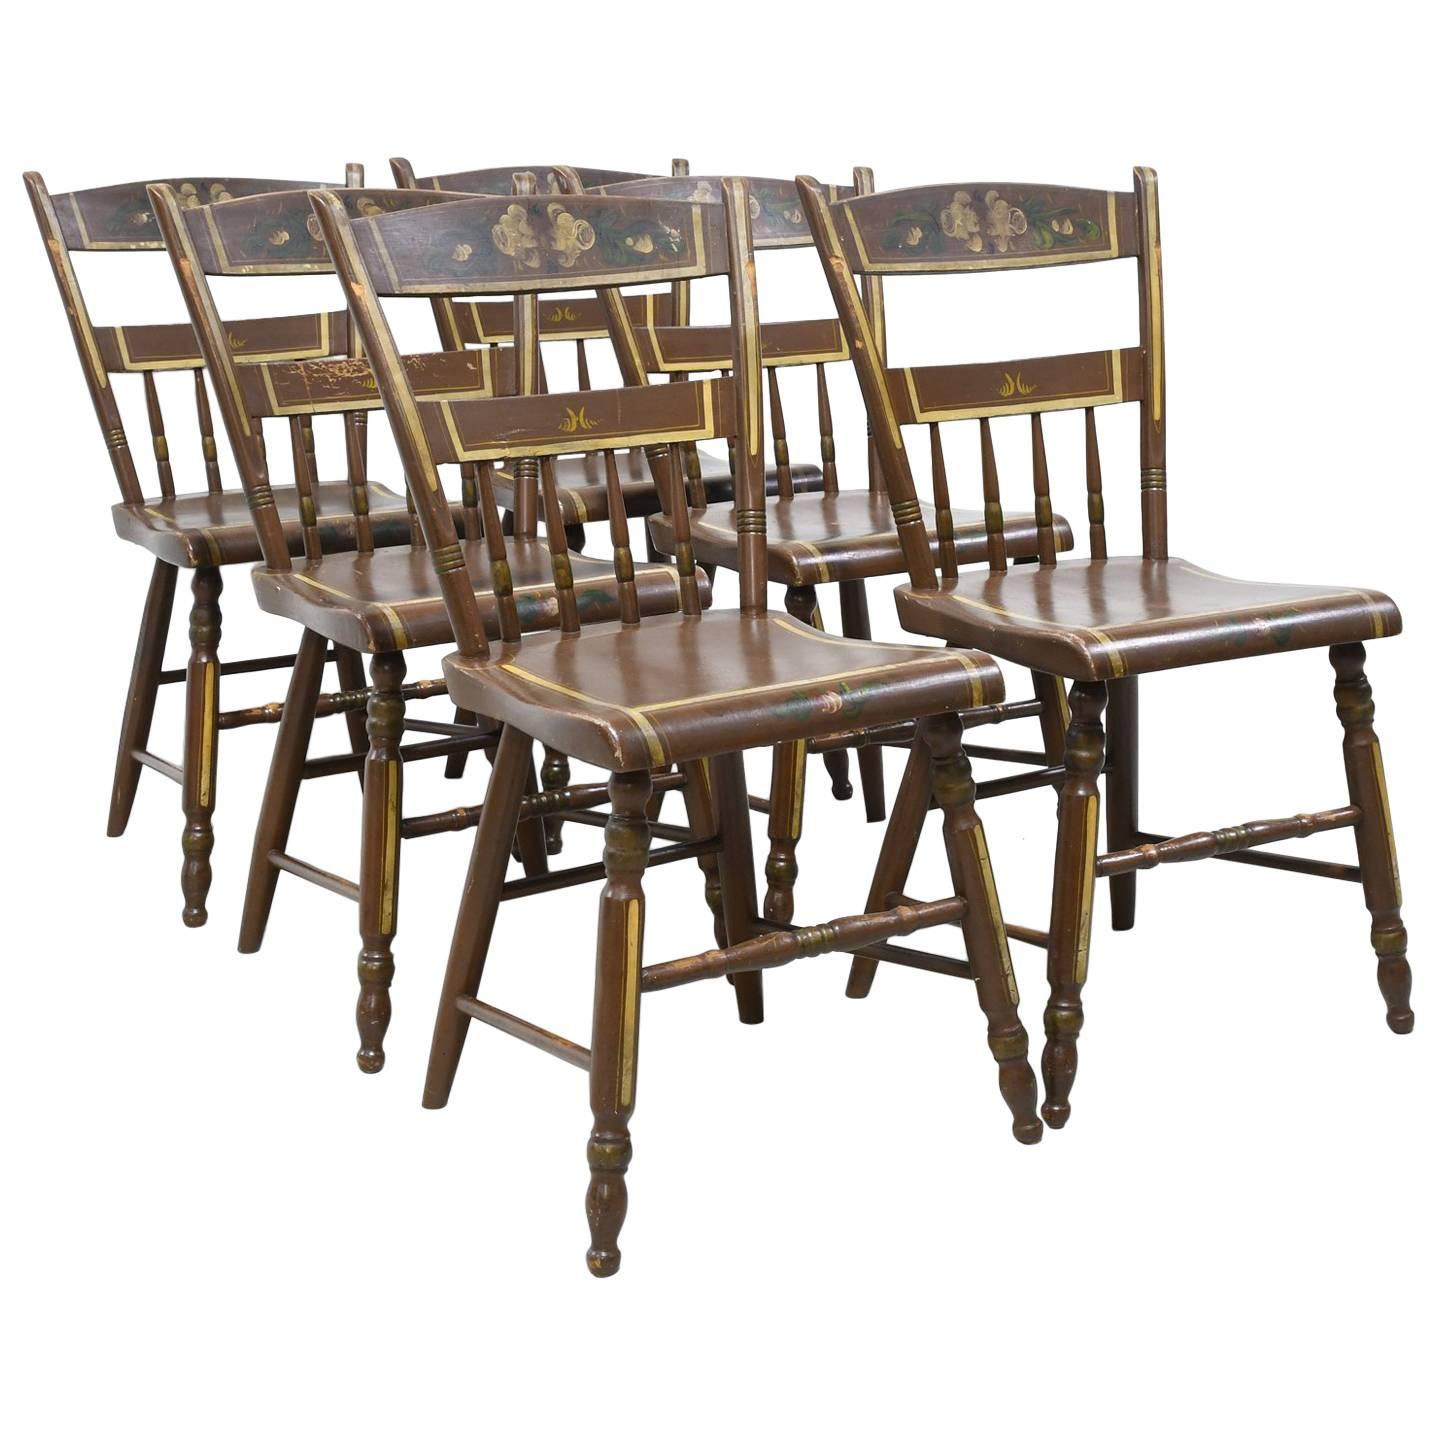 Set of Six Pennsylvania 1/2 Spindle Back Plank Seat Kitchen Chairs, circa 1870